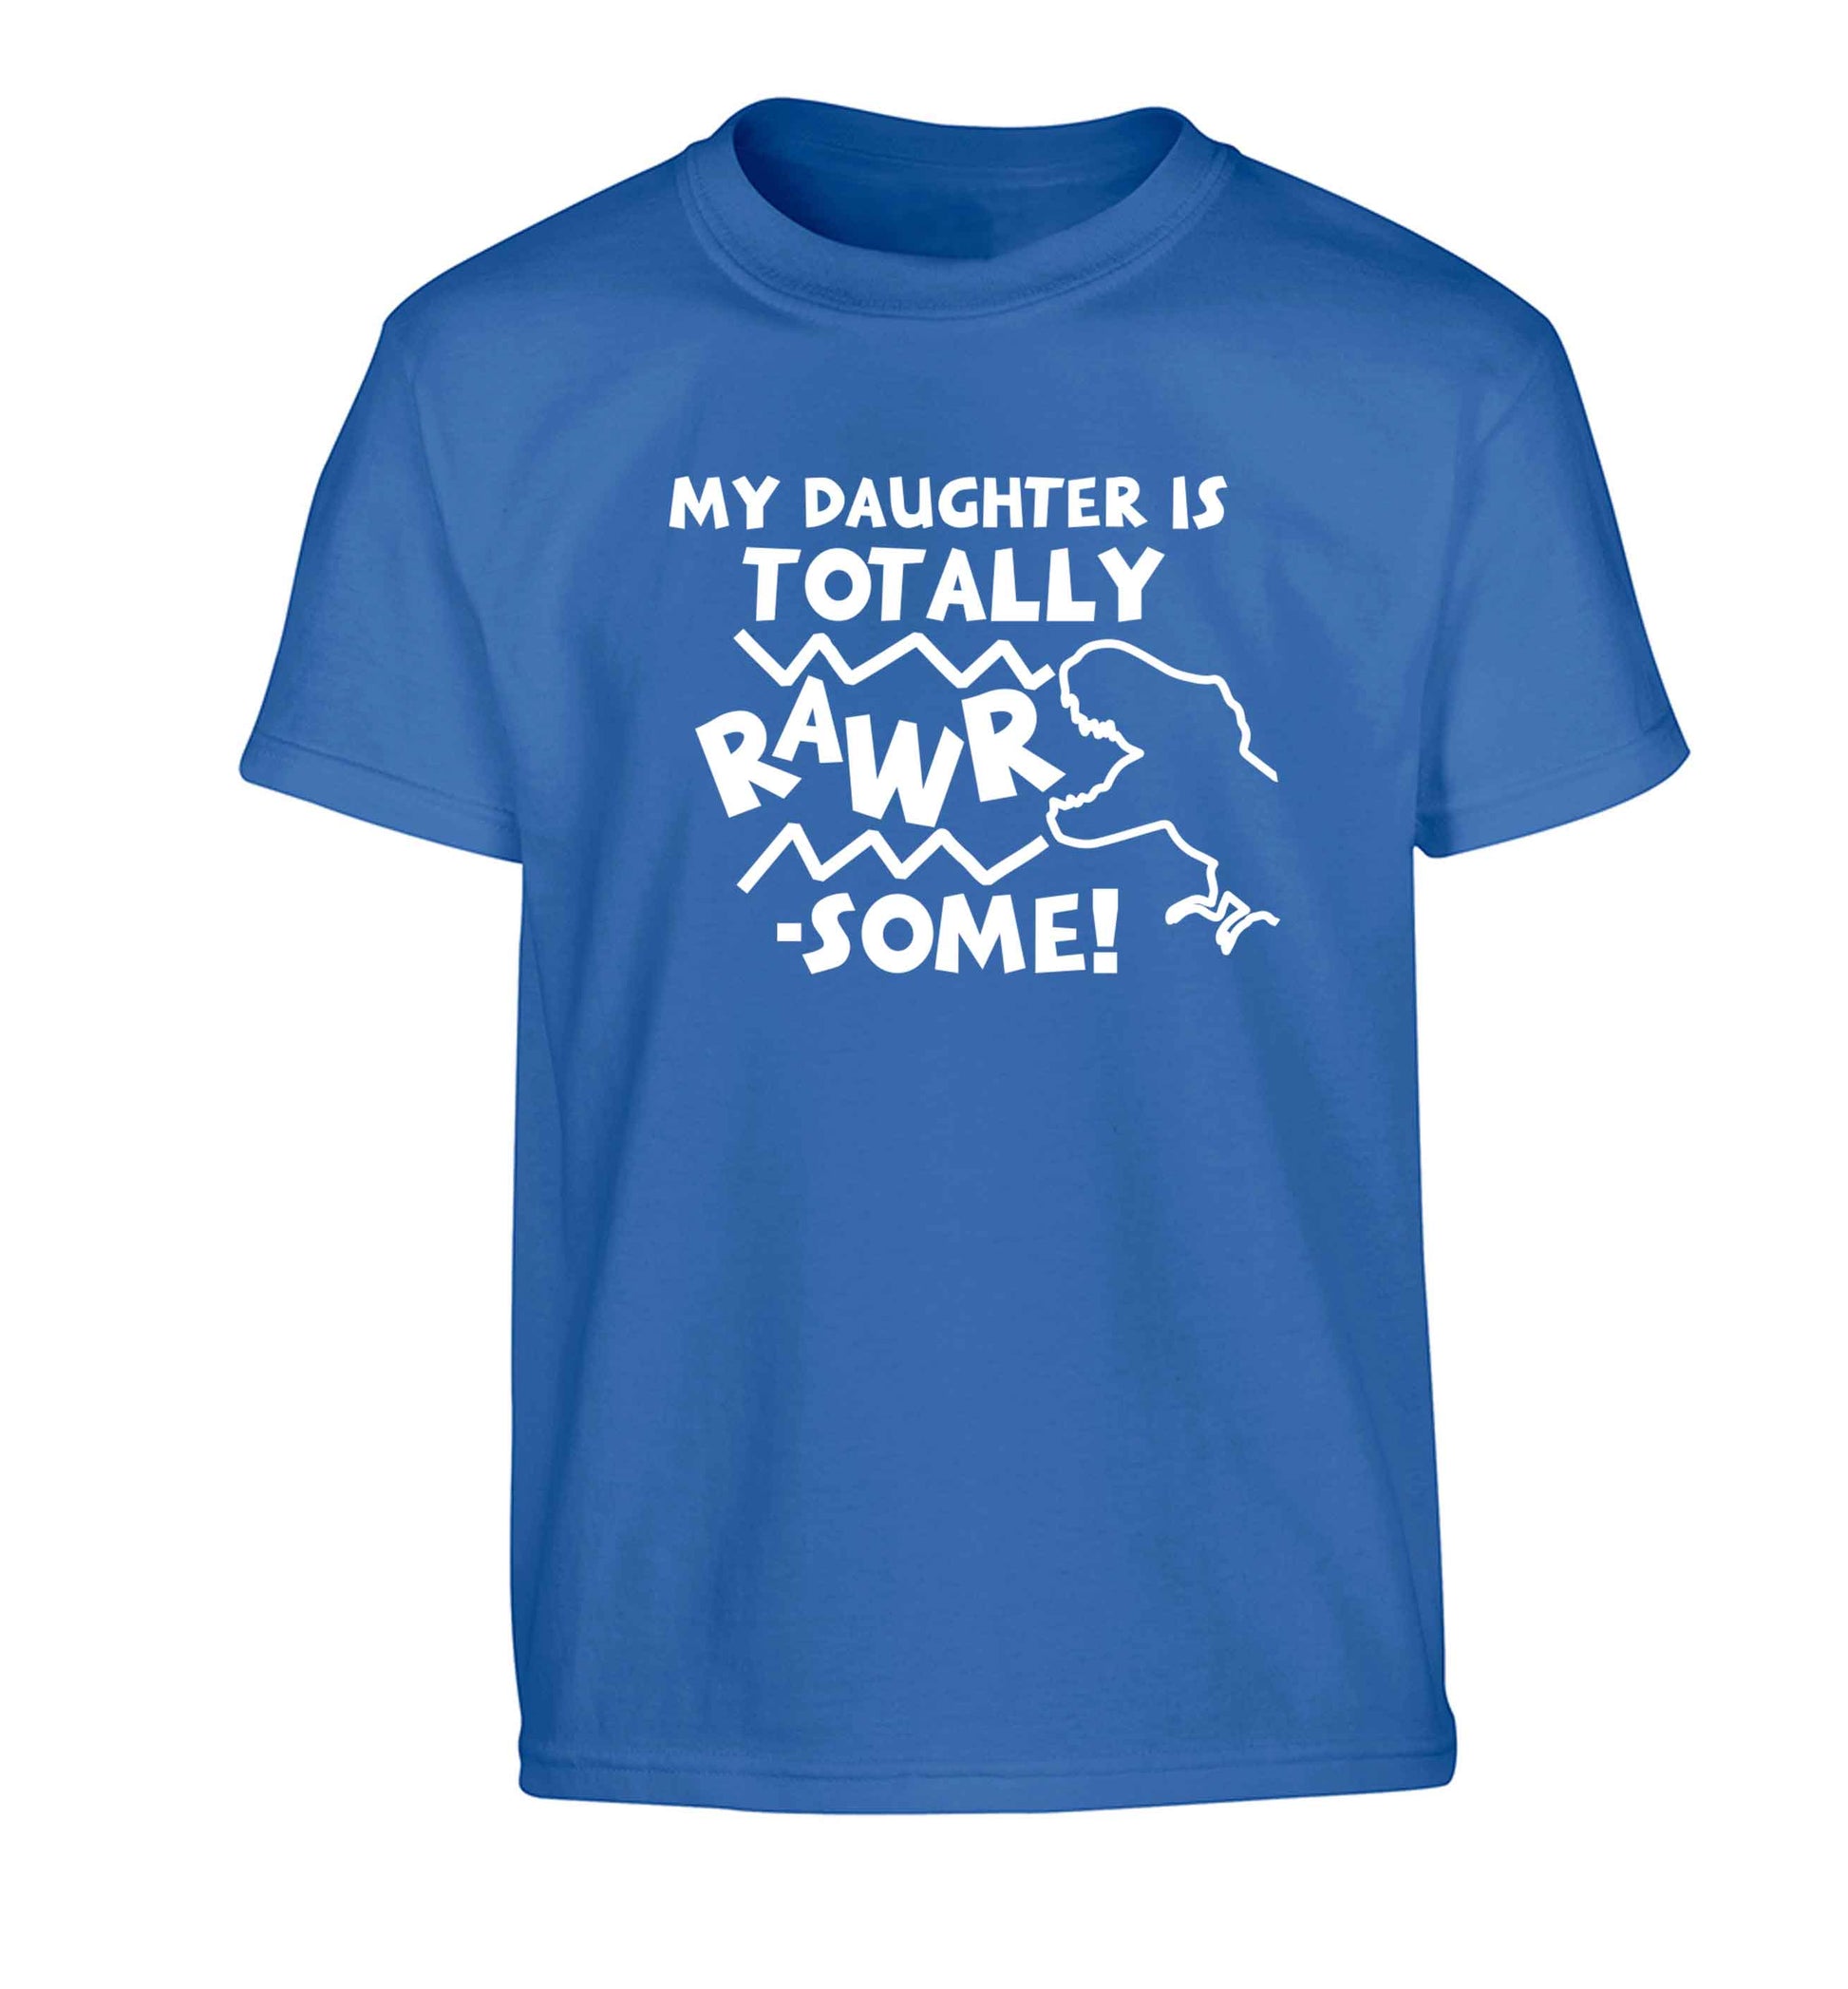 My daughter is totally rawrsome Children's blue Tshirt 12-13 Years